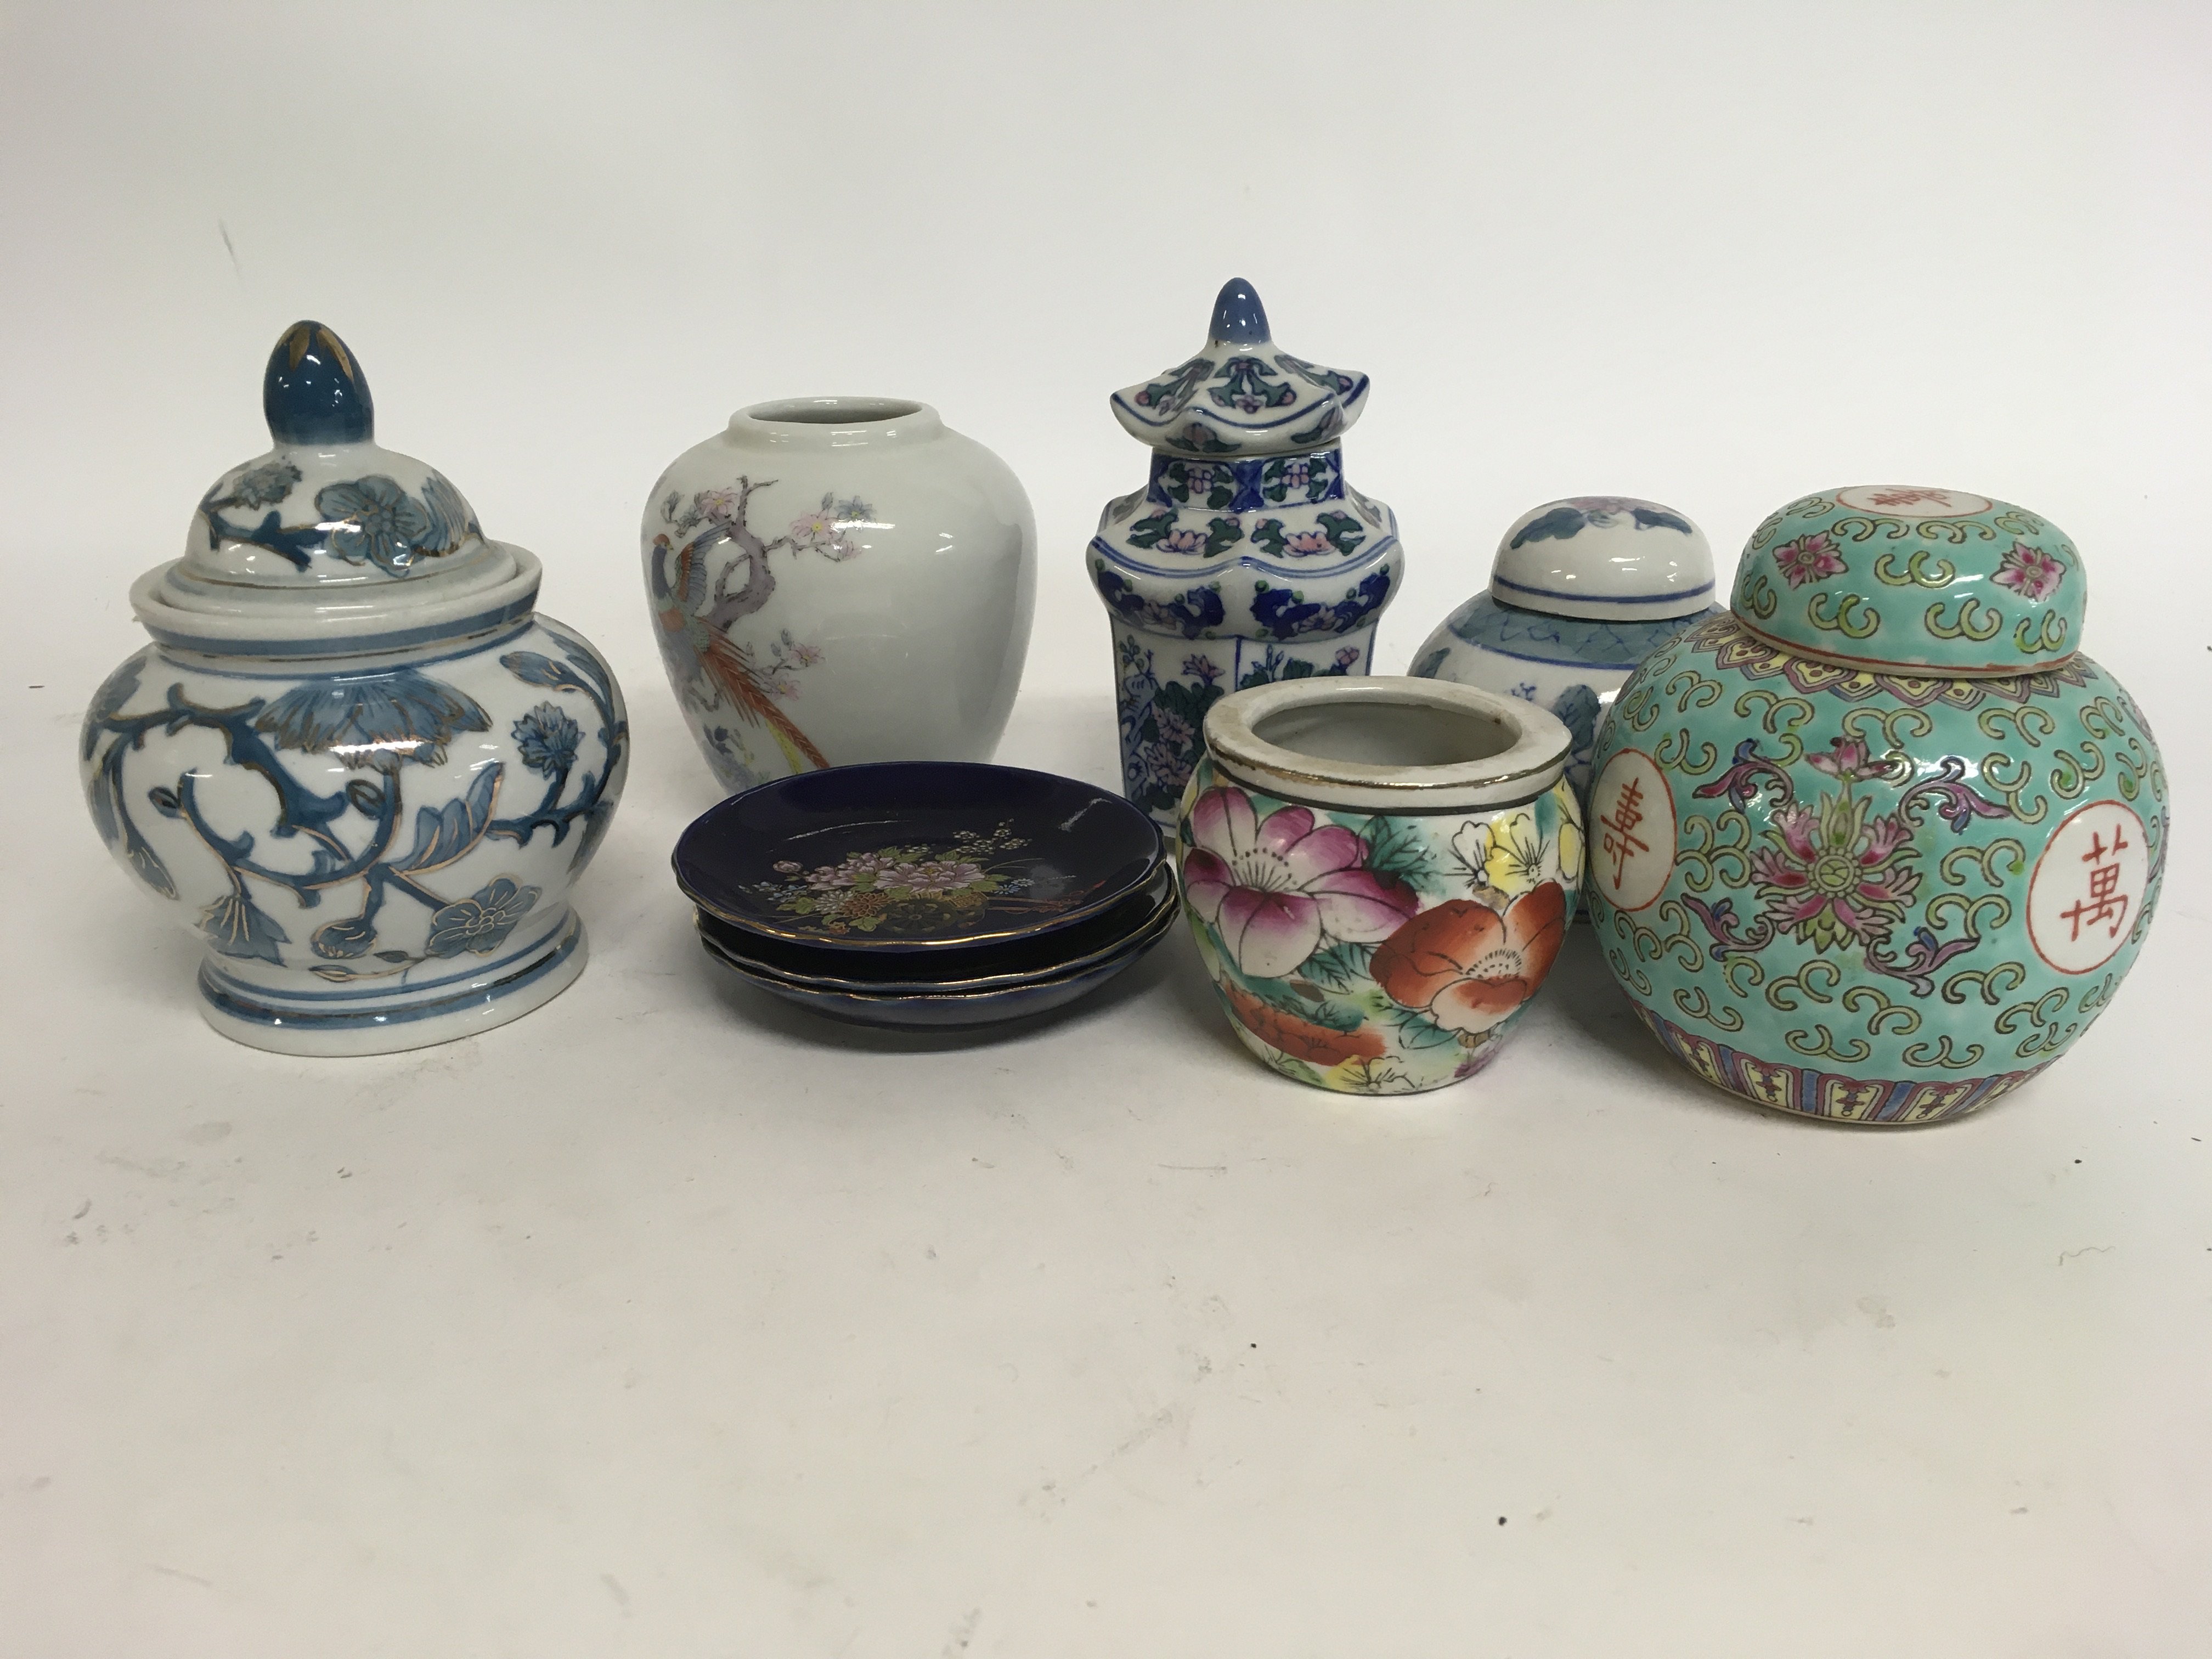 A large mixed lot of 20th century Chinese ceramics